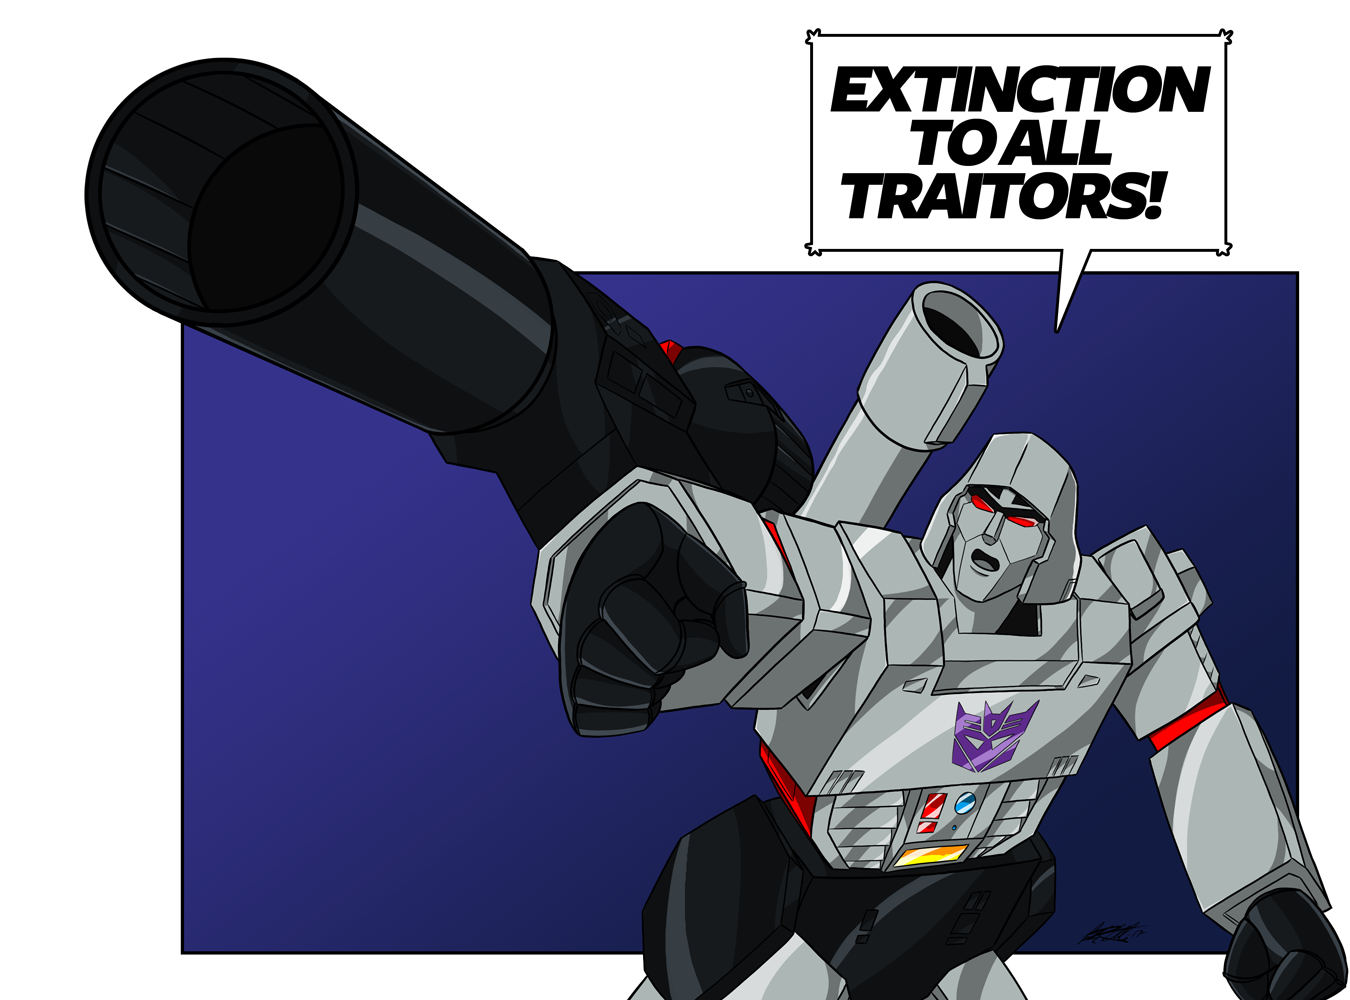 Extinction to All Traitors! (cartoon colors)